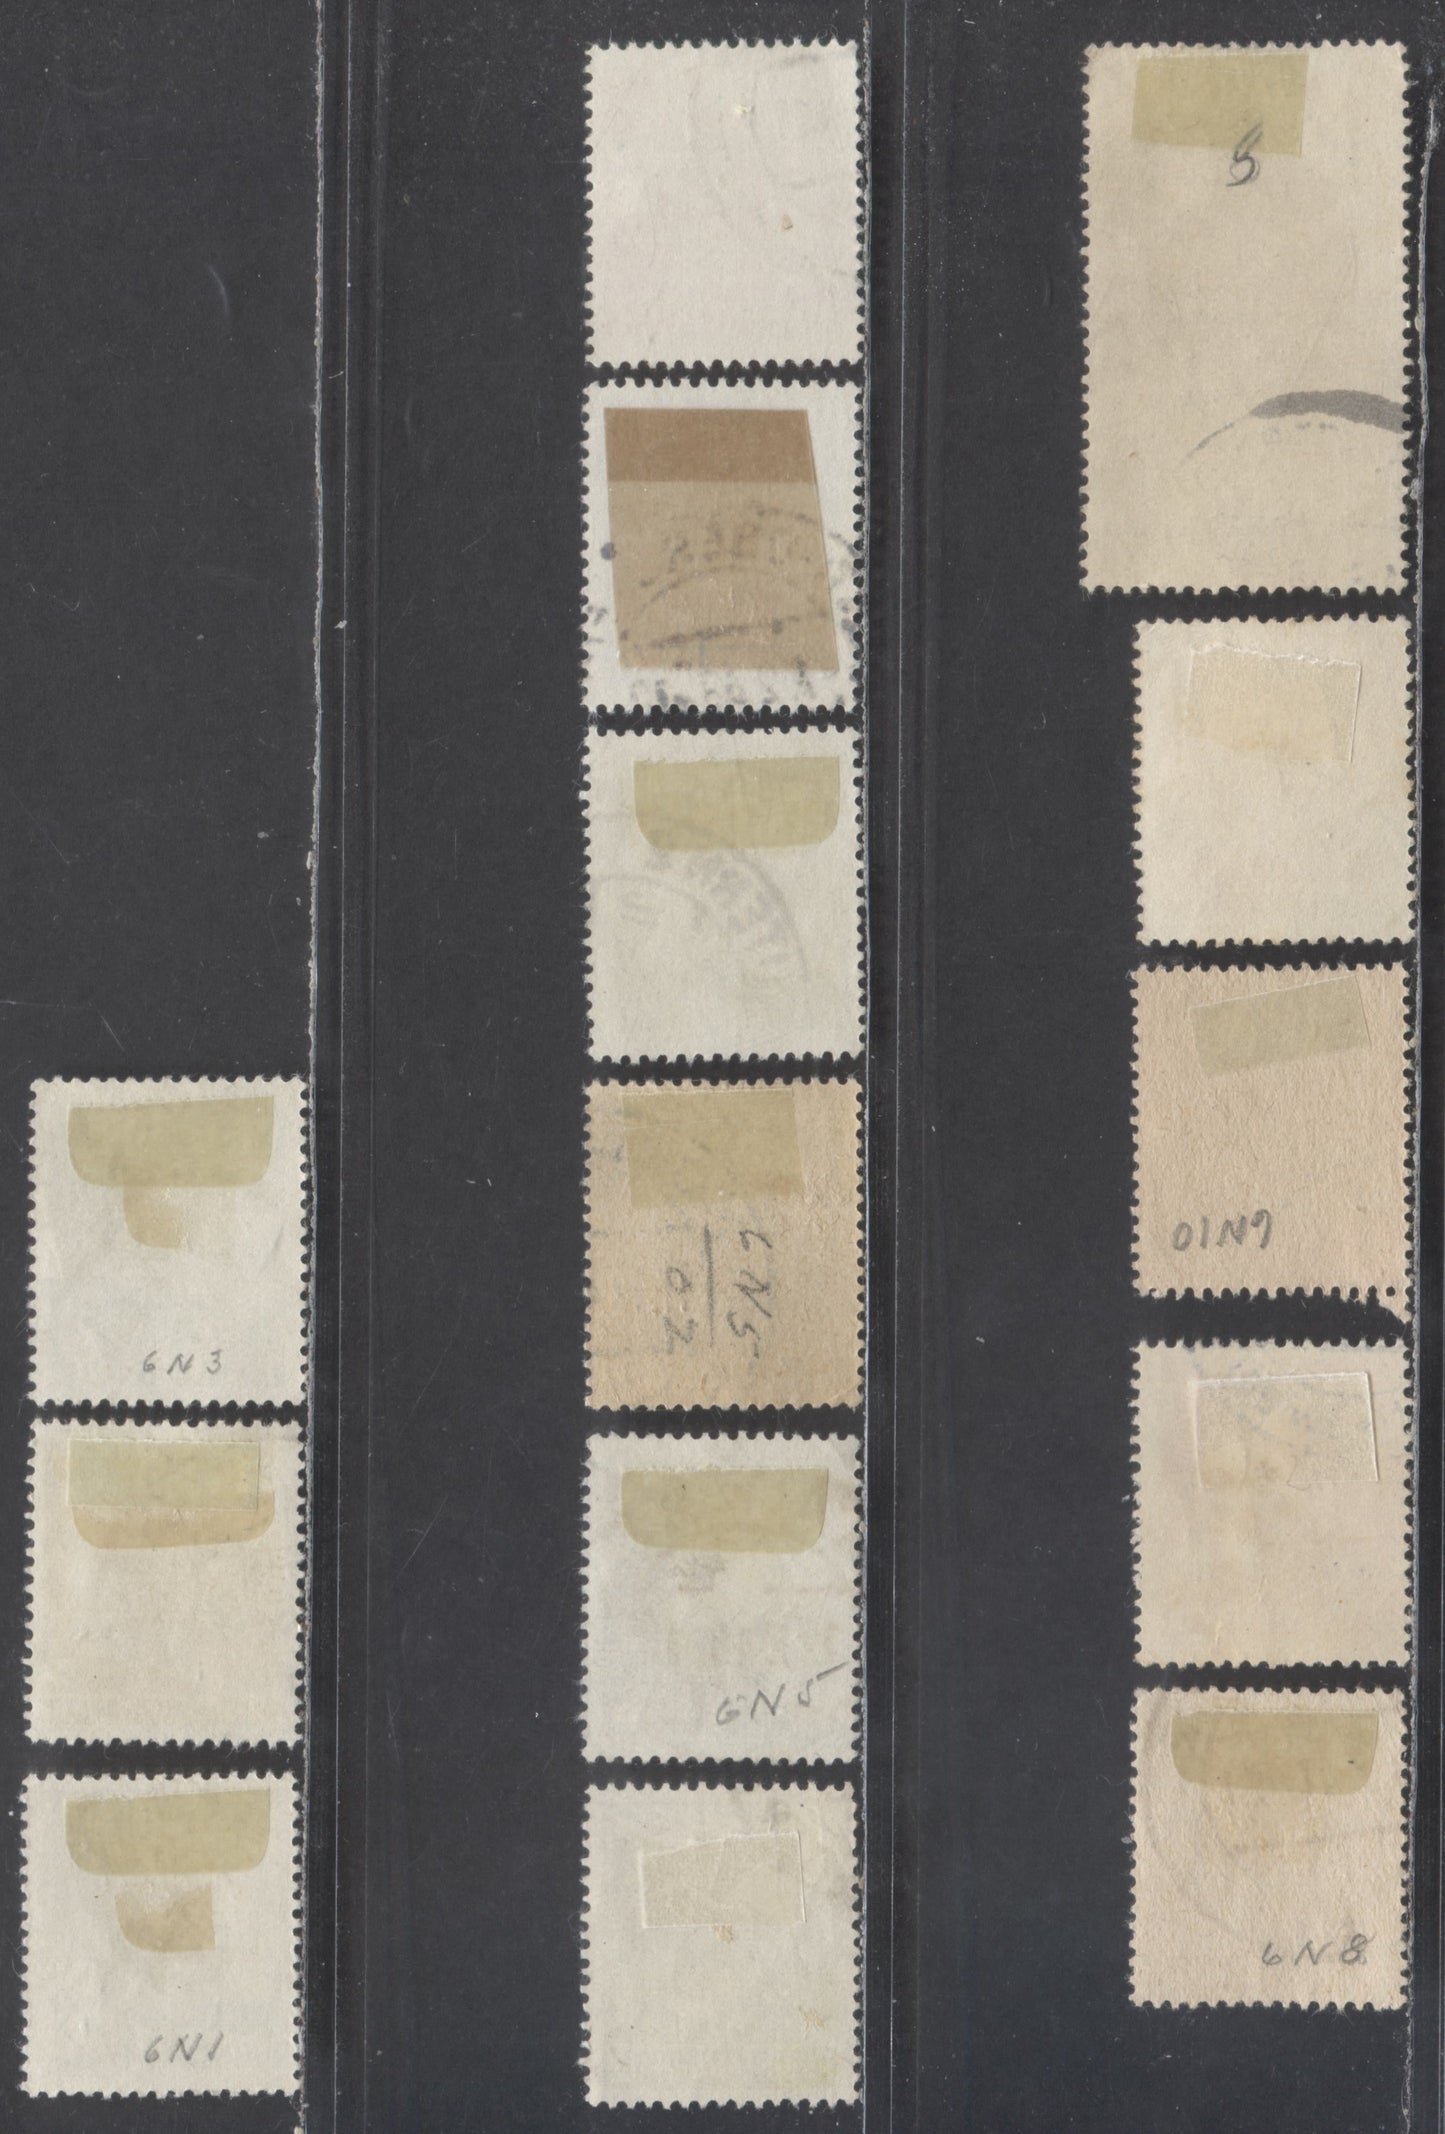 Lot 86 Germany SC#6N1-6N15 1947-1948 Definitives, Plus Additional Shades Of The 15pf & 24pf, 14 Very Fine Used Singles, Click on Listing to See ALL Pictures, 2017 Scott Cat. $7.7 USD